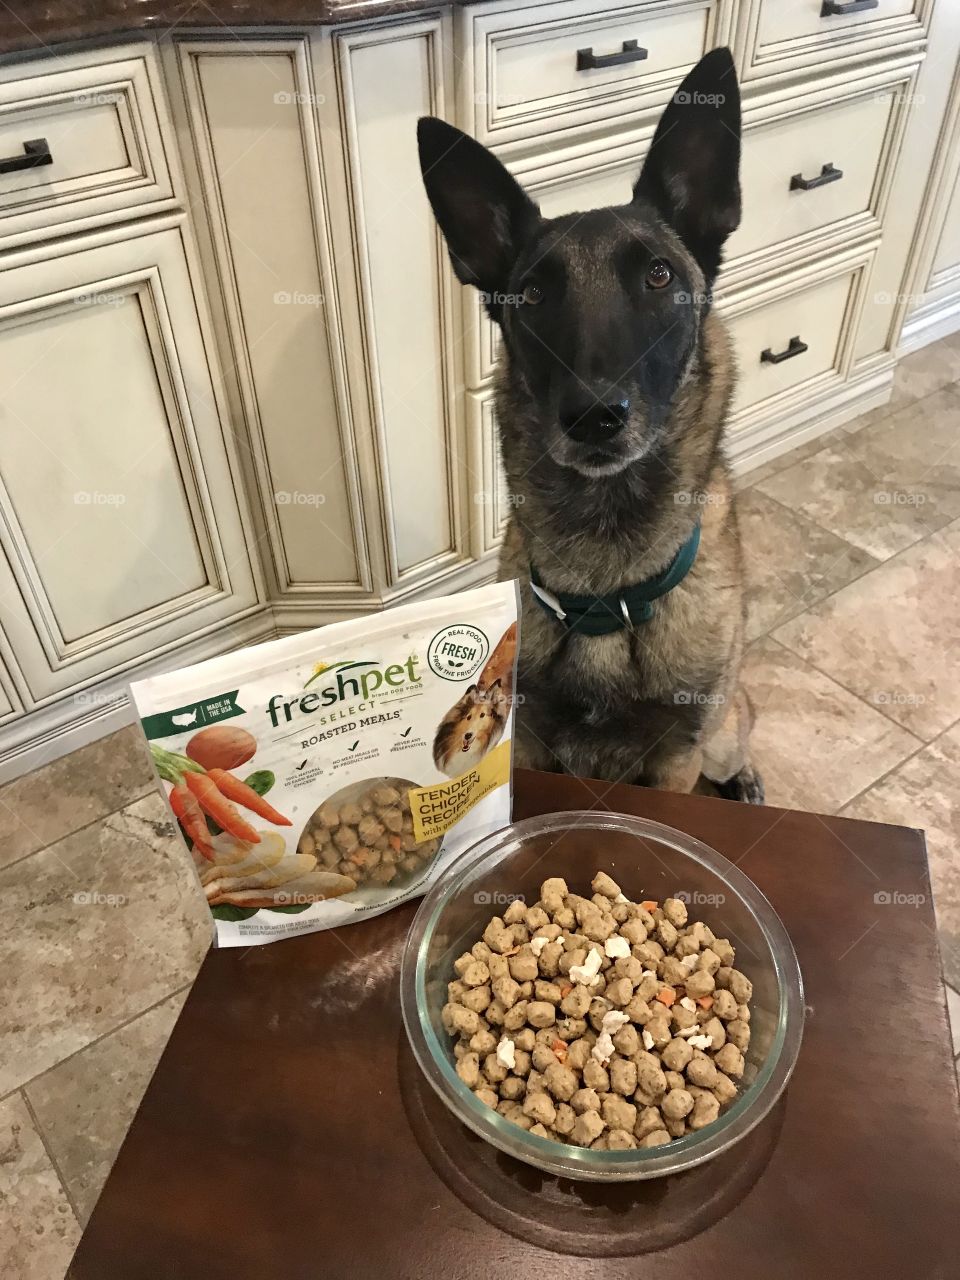 Freshpet Select roasted chicken and vegetables. Fresh, healthy, and all natural meals for dogs and cats. Anticipation for a delicious meal.